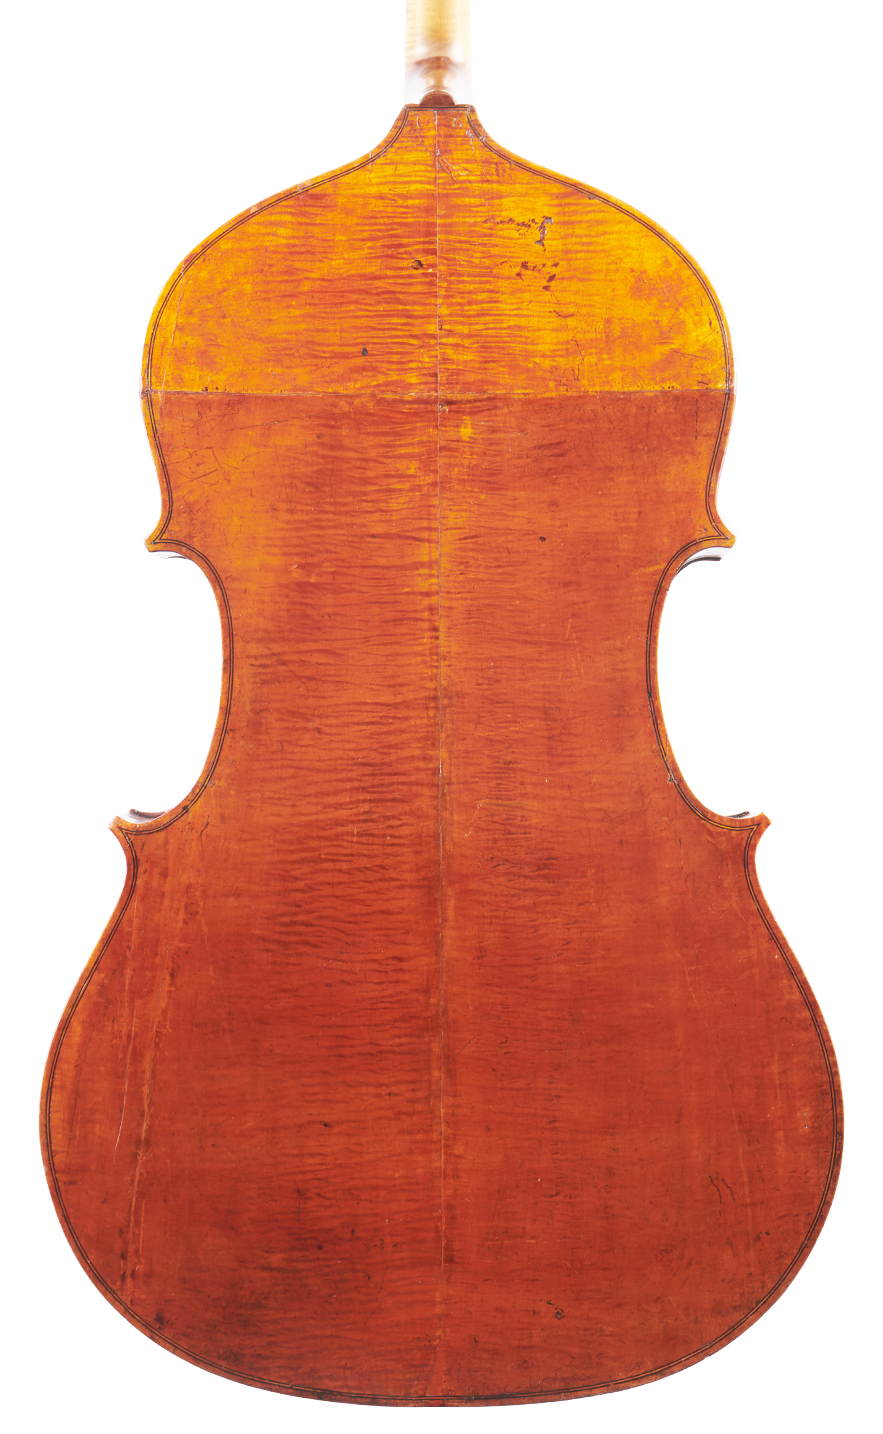 Northern English Double Bass rear image